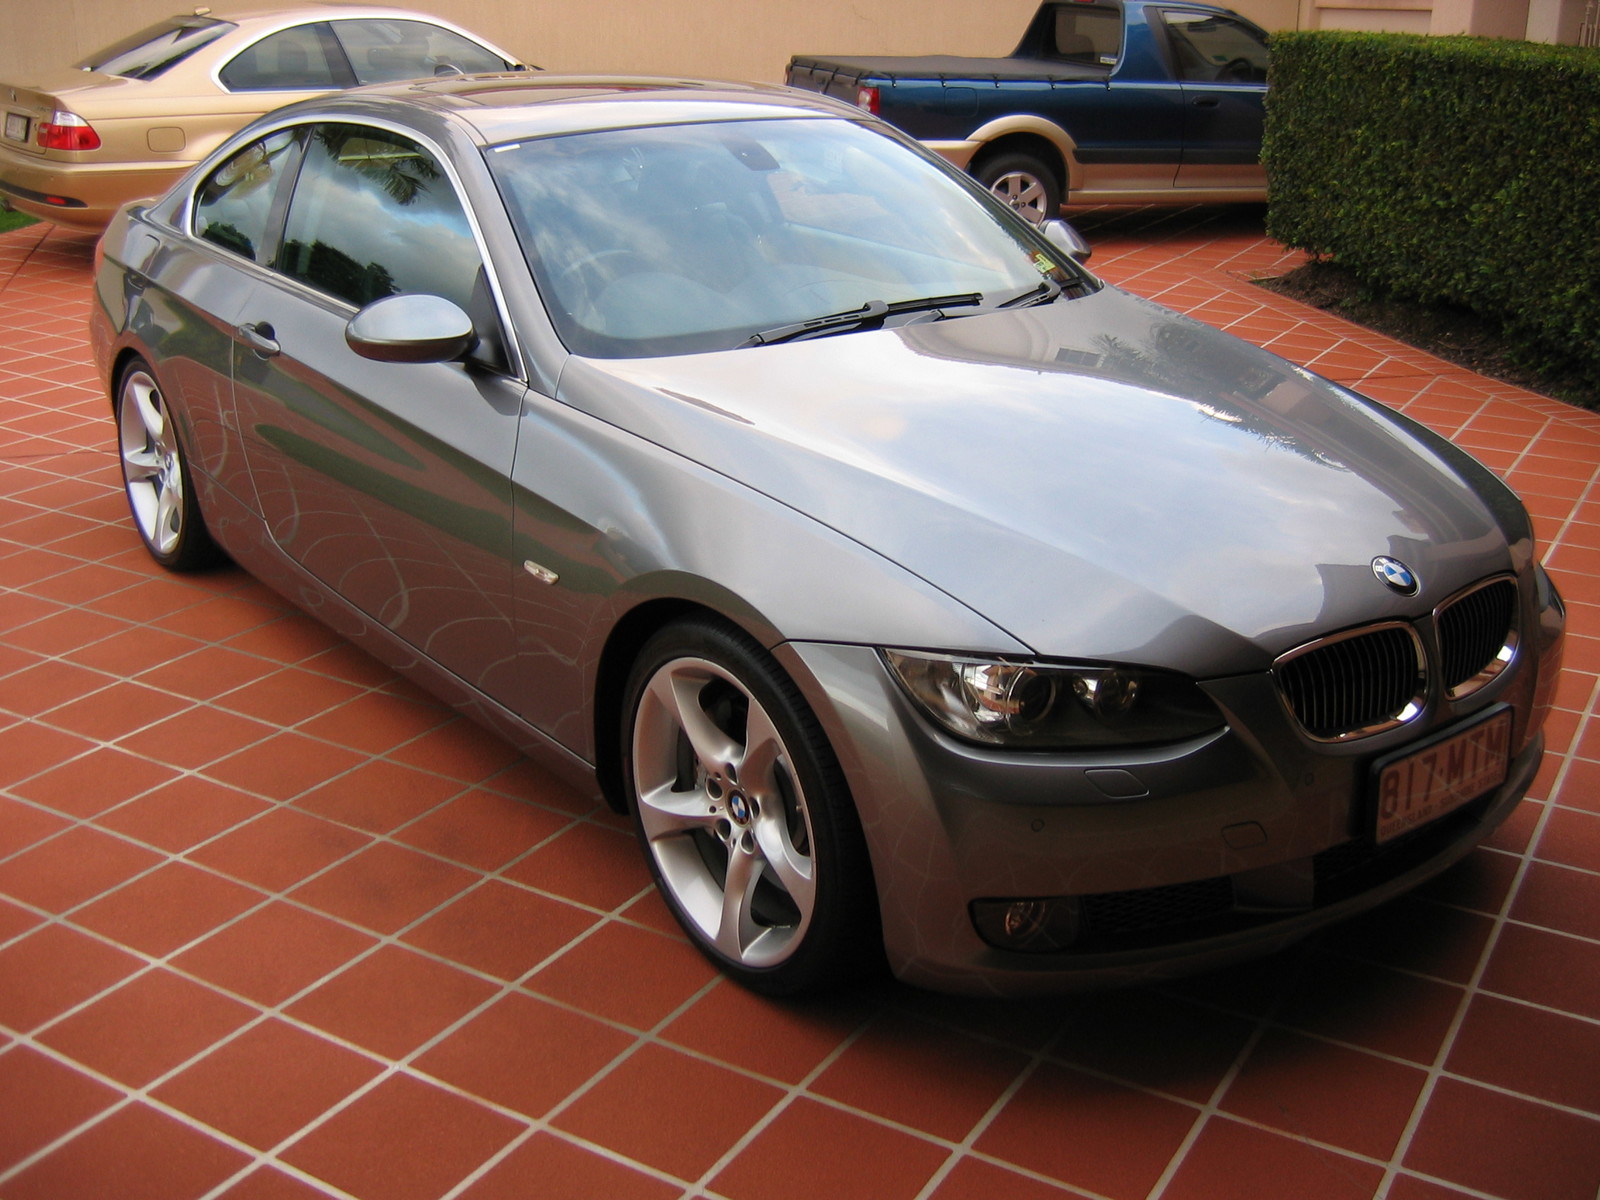 Space Grey 2007 BMW 335i Coupe